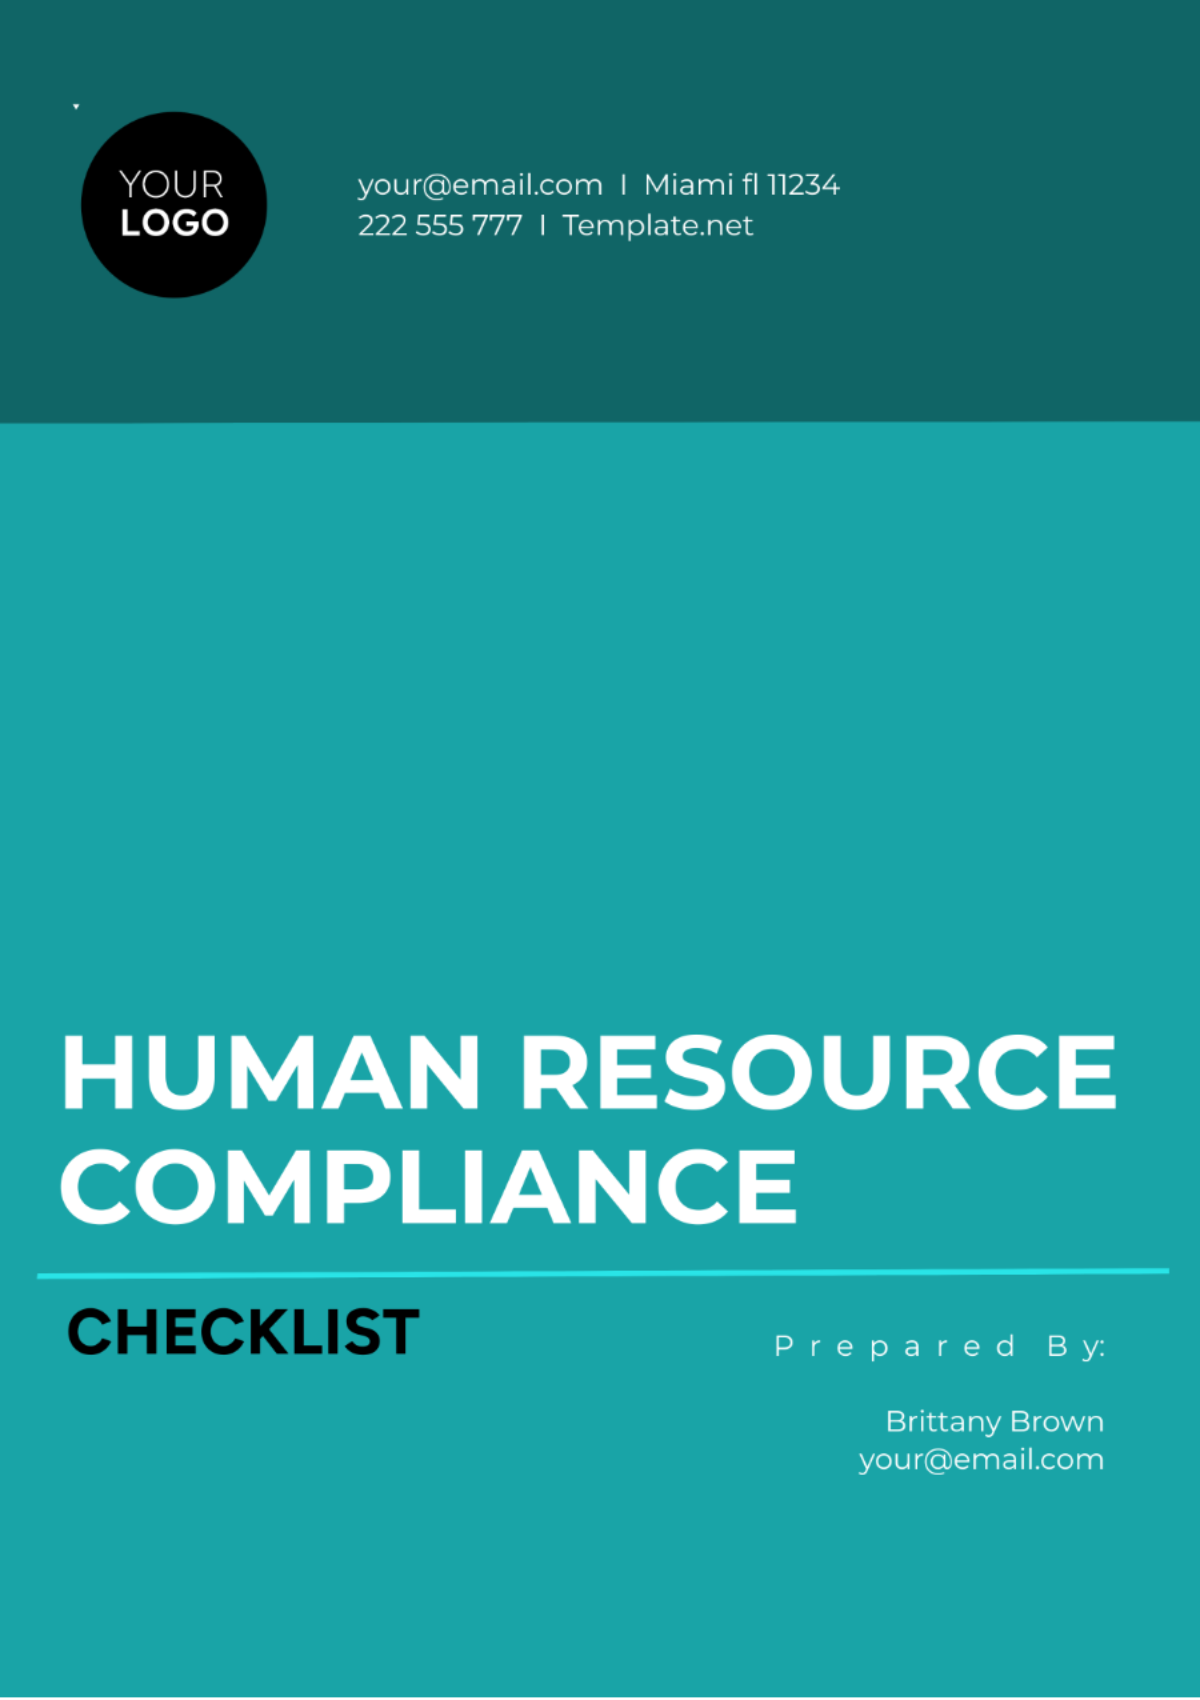 Free Human Resource Compliance Checklist Template